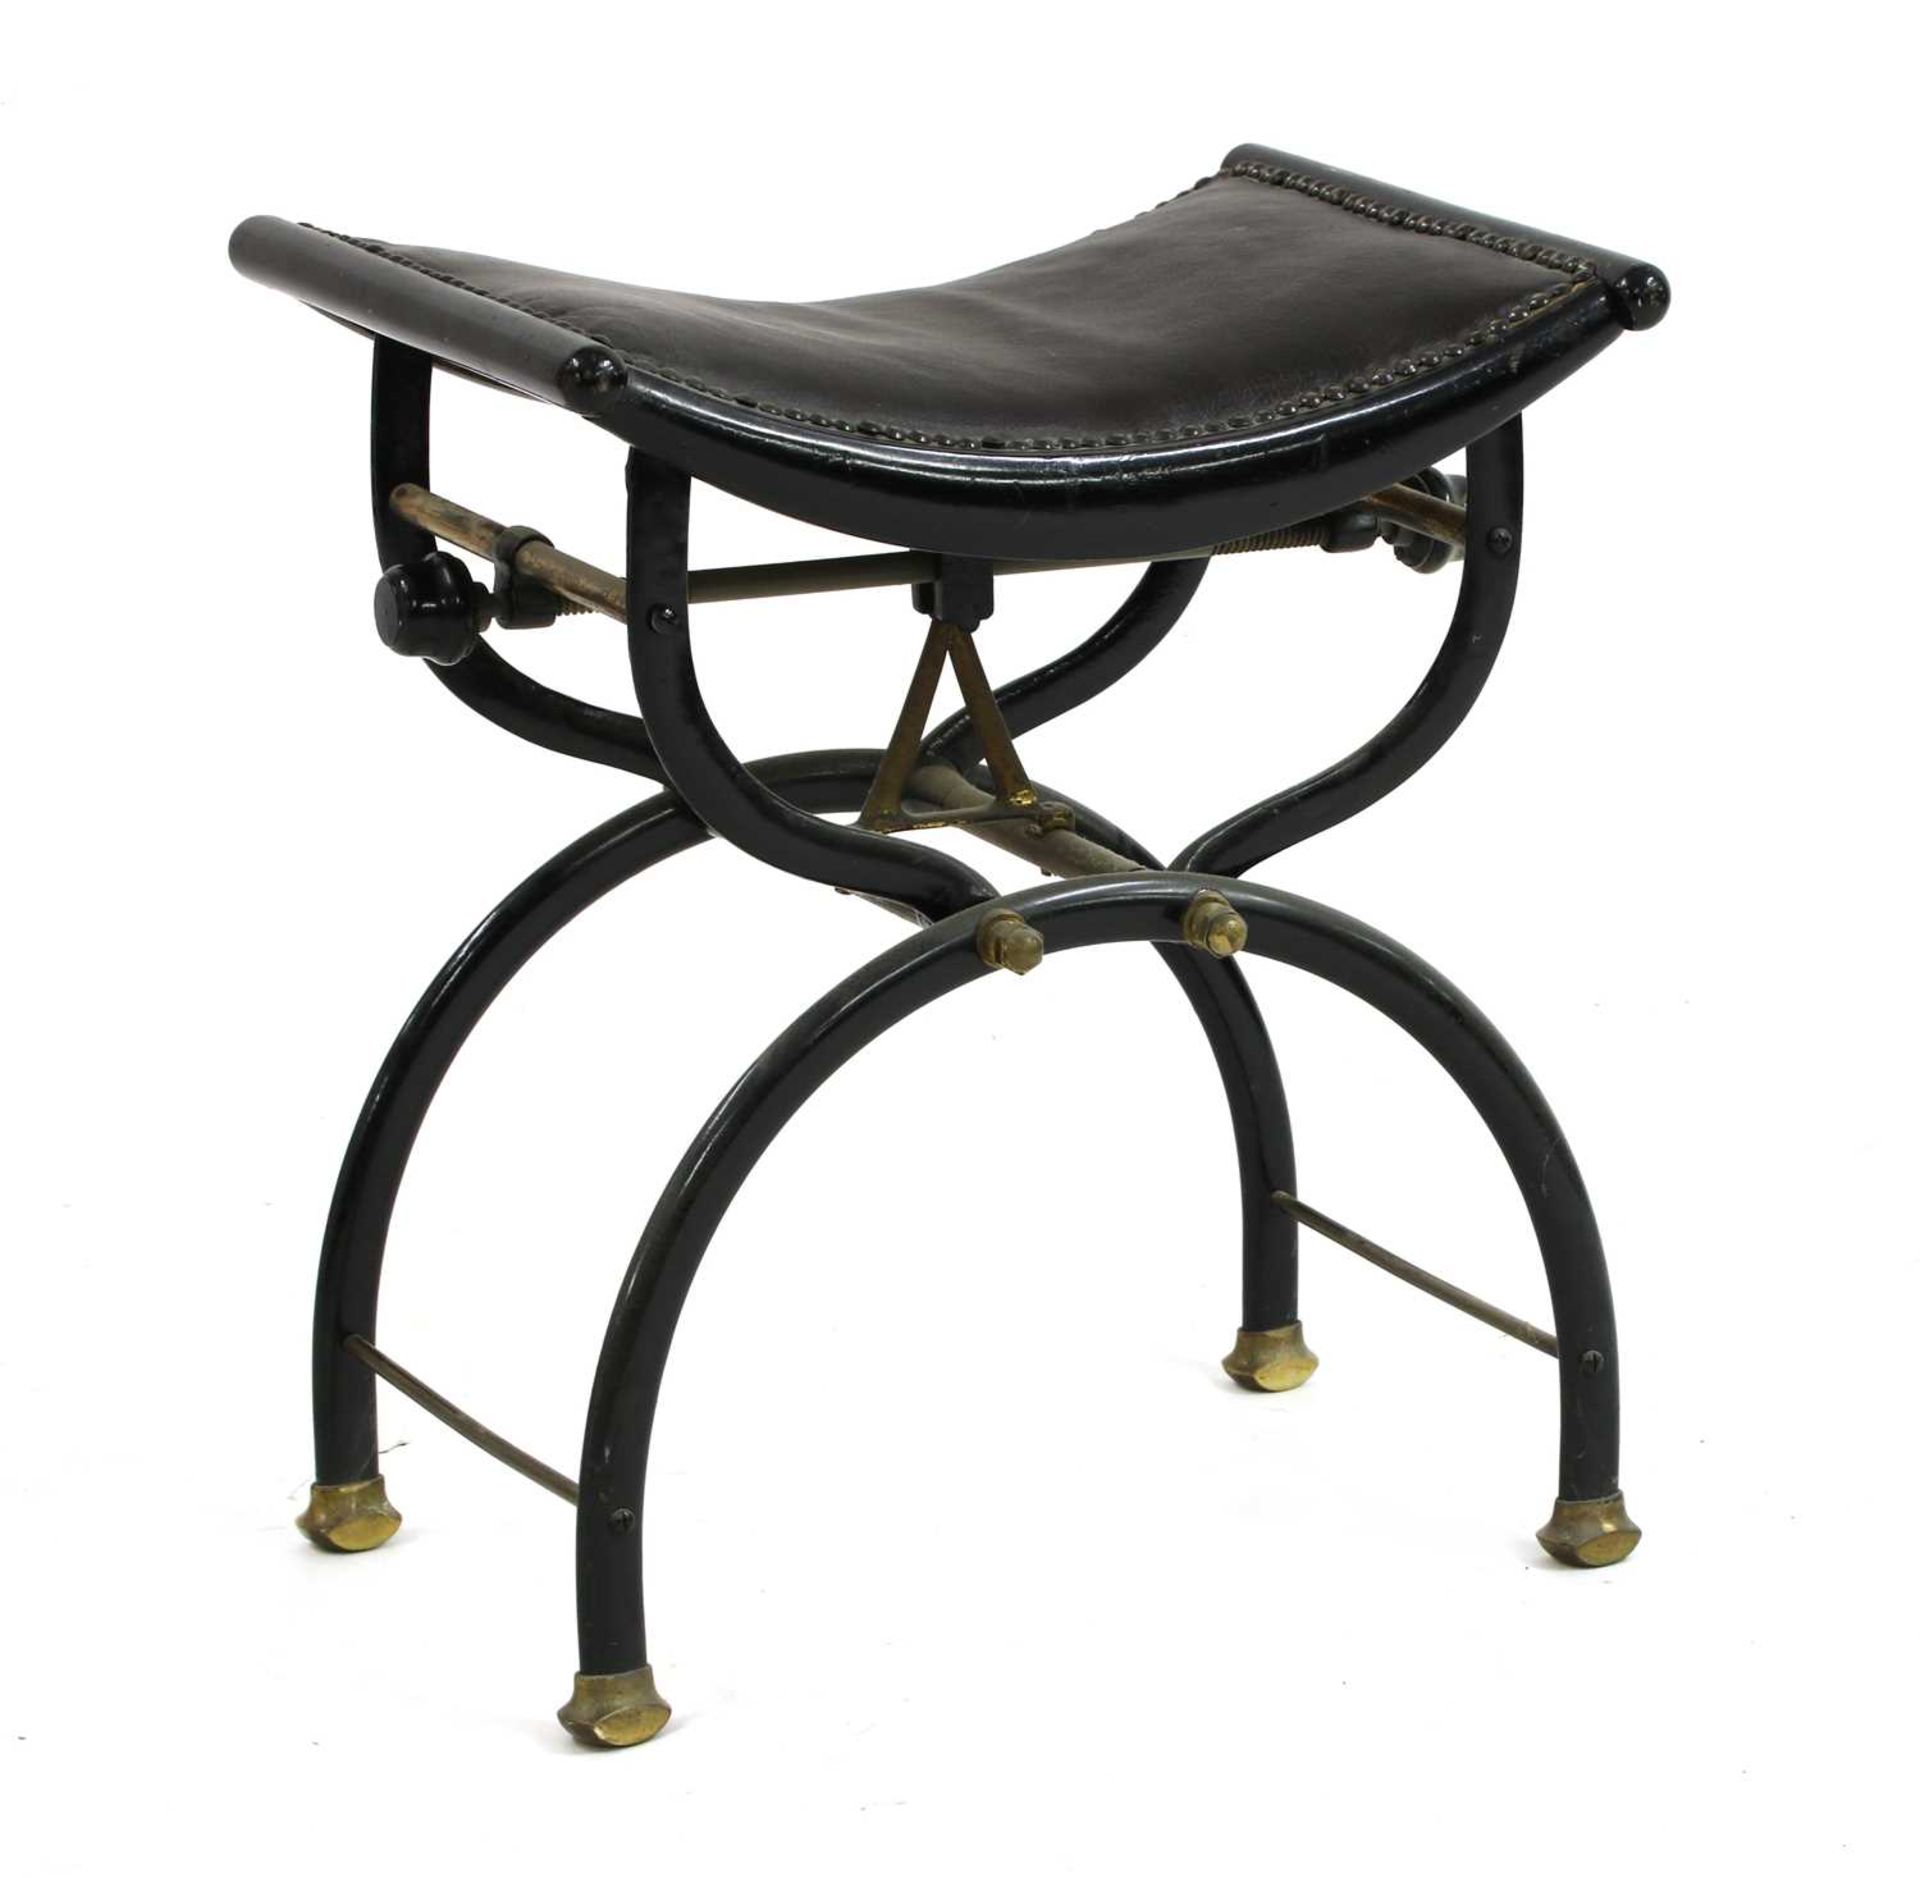 C H Hare & Son Patent stool, - Image 3 of 3